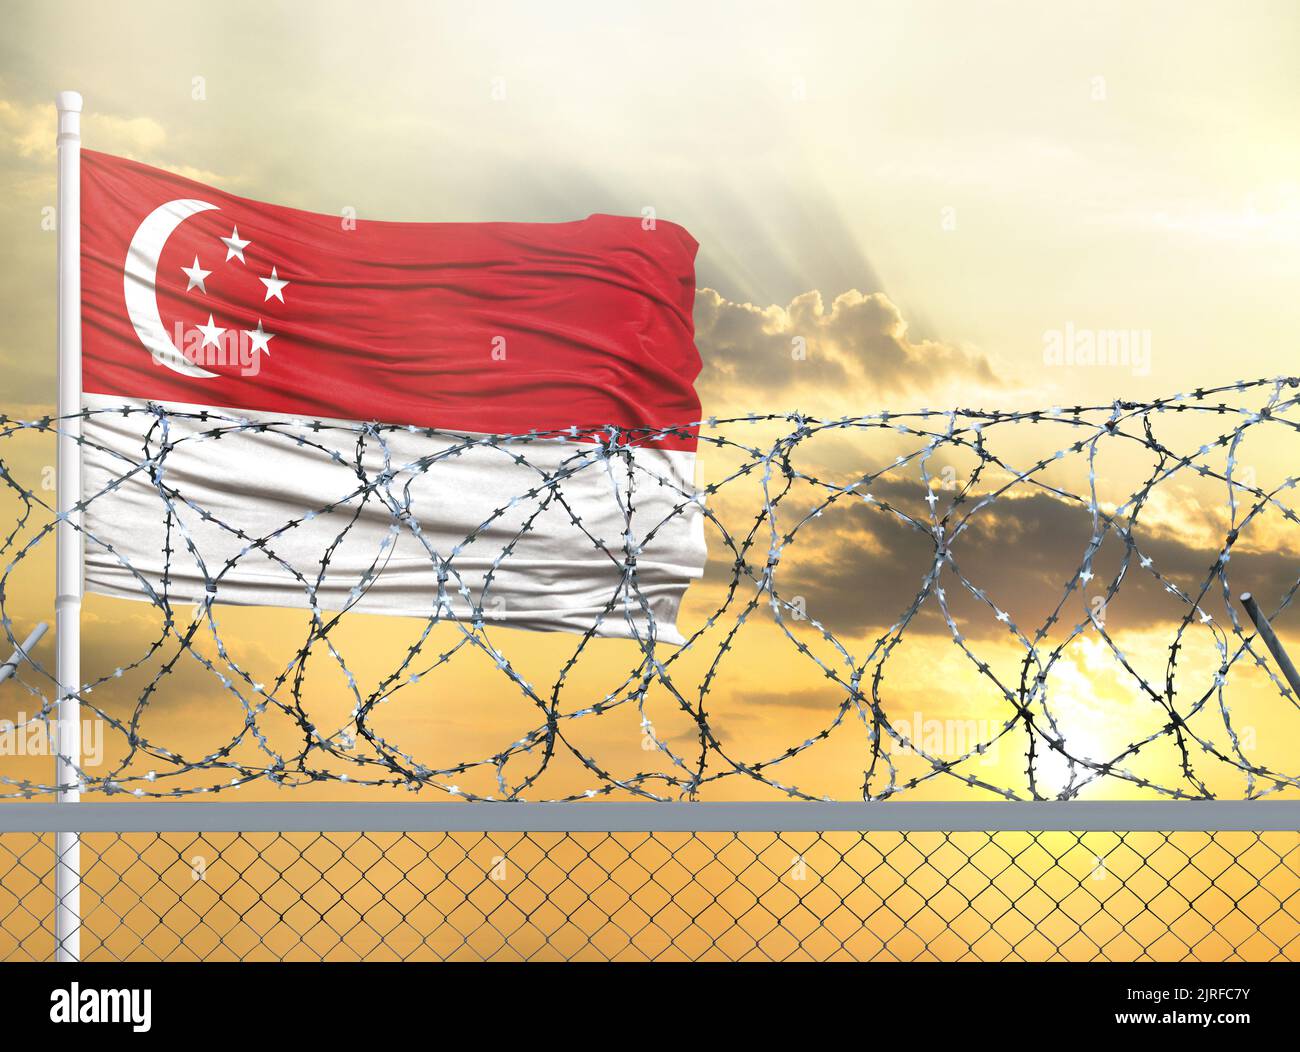 Flagpole with the flag of Singapore against the sky and behind a fence with barbed wire. The concept of protecting the borders of territories. Stock Photo